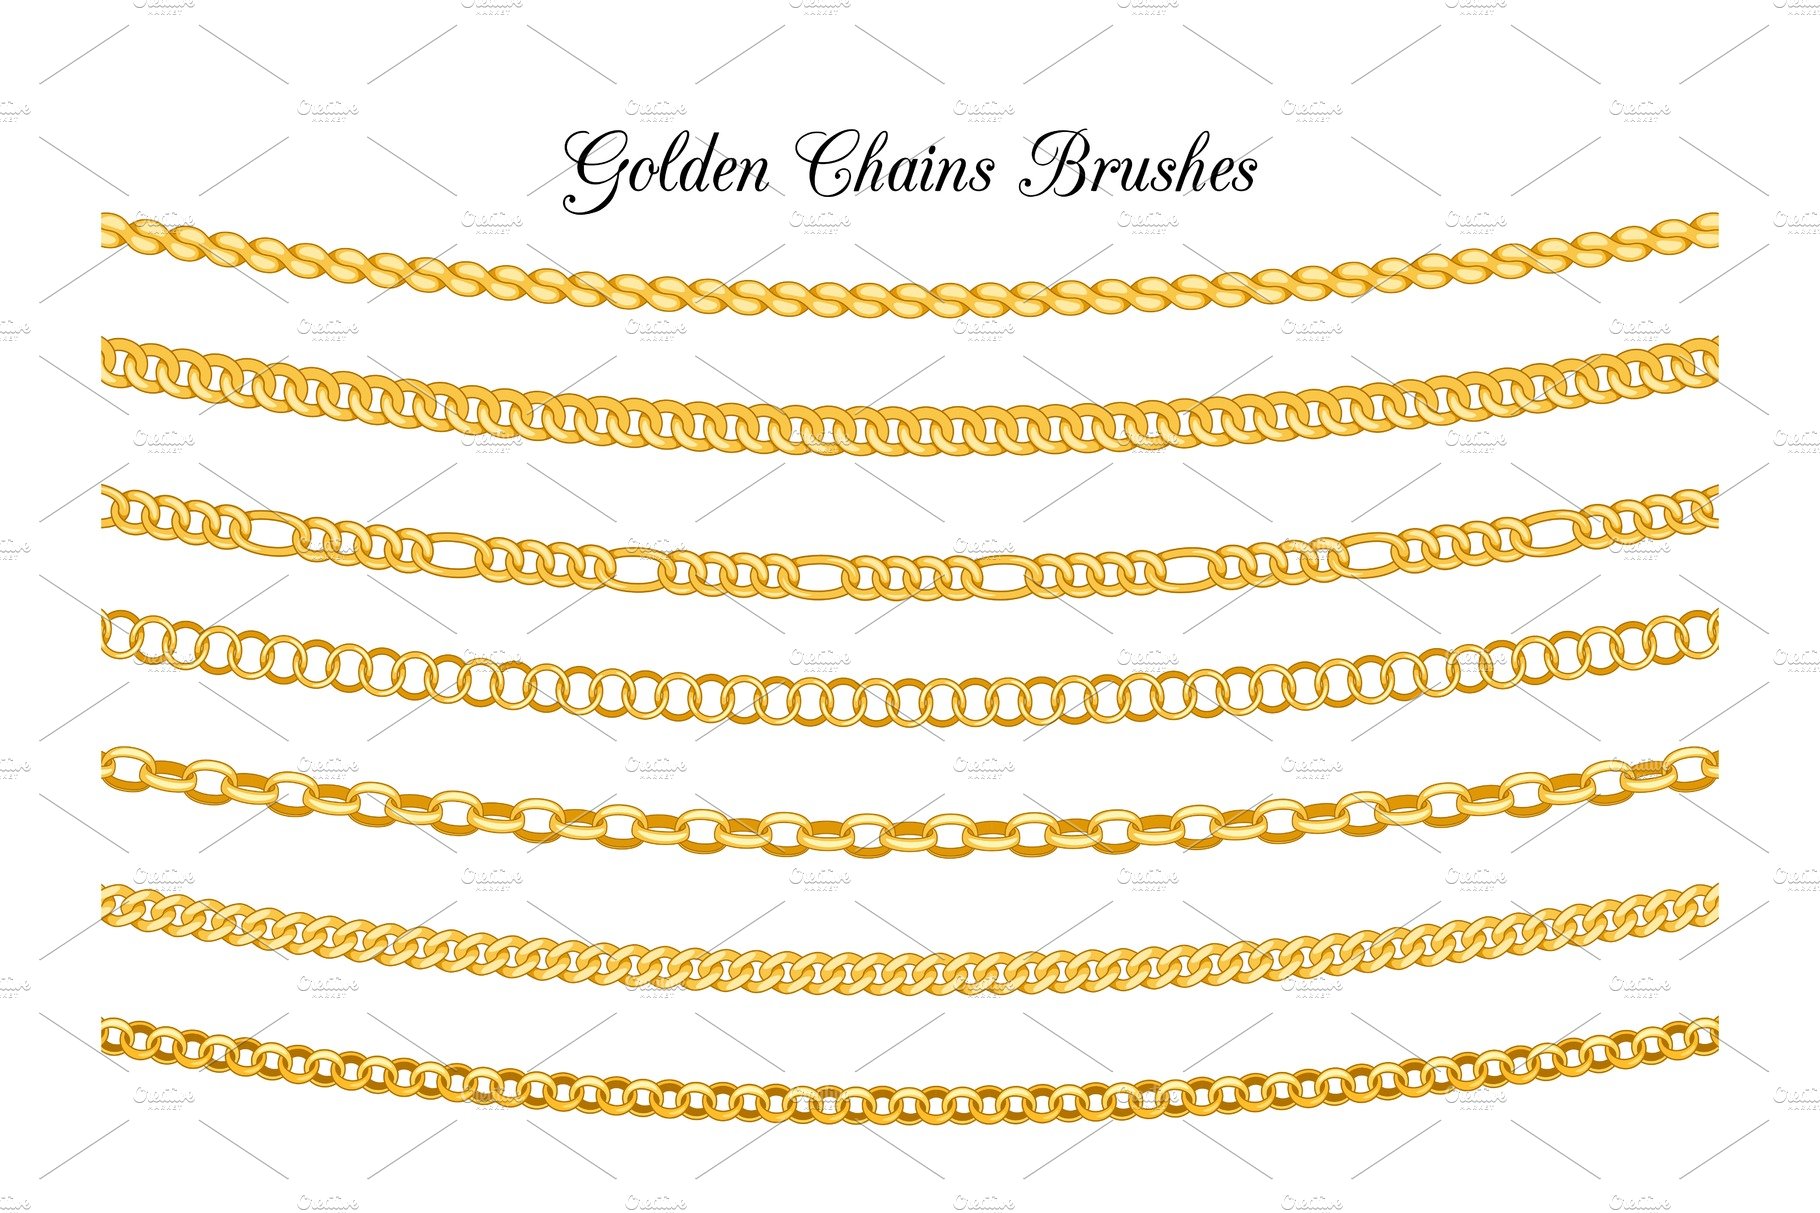 Golden chains brushes cover image.